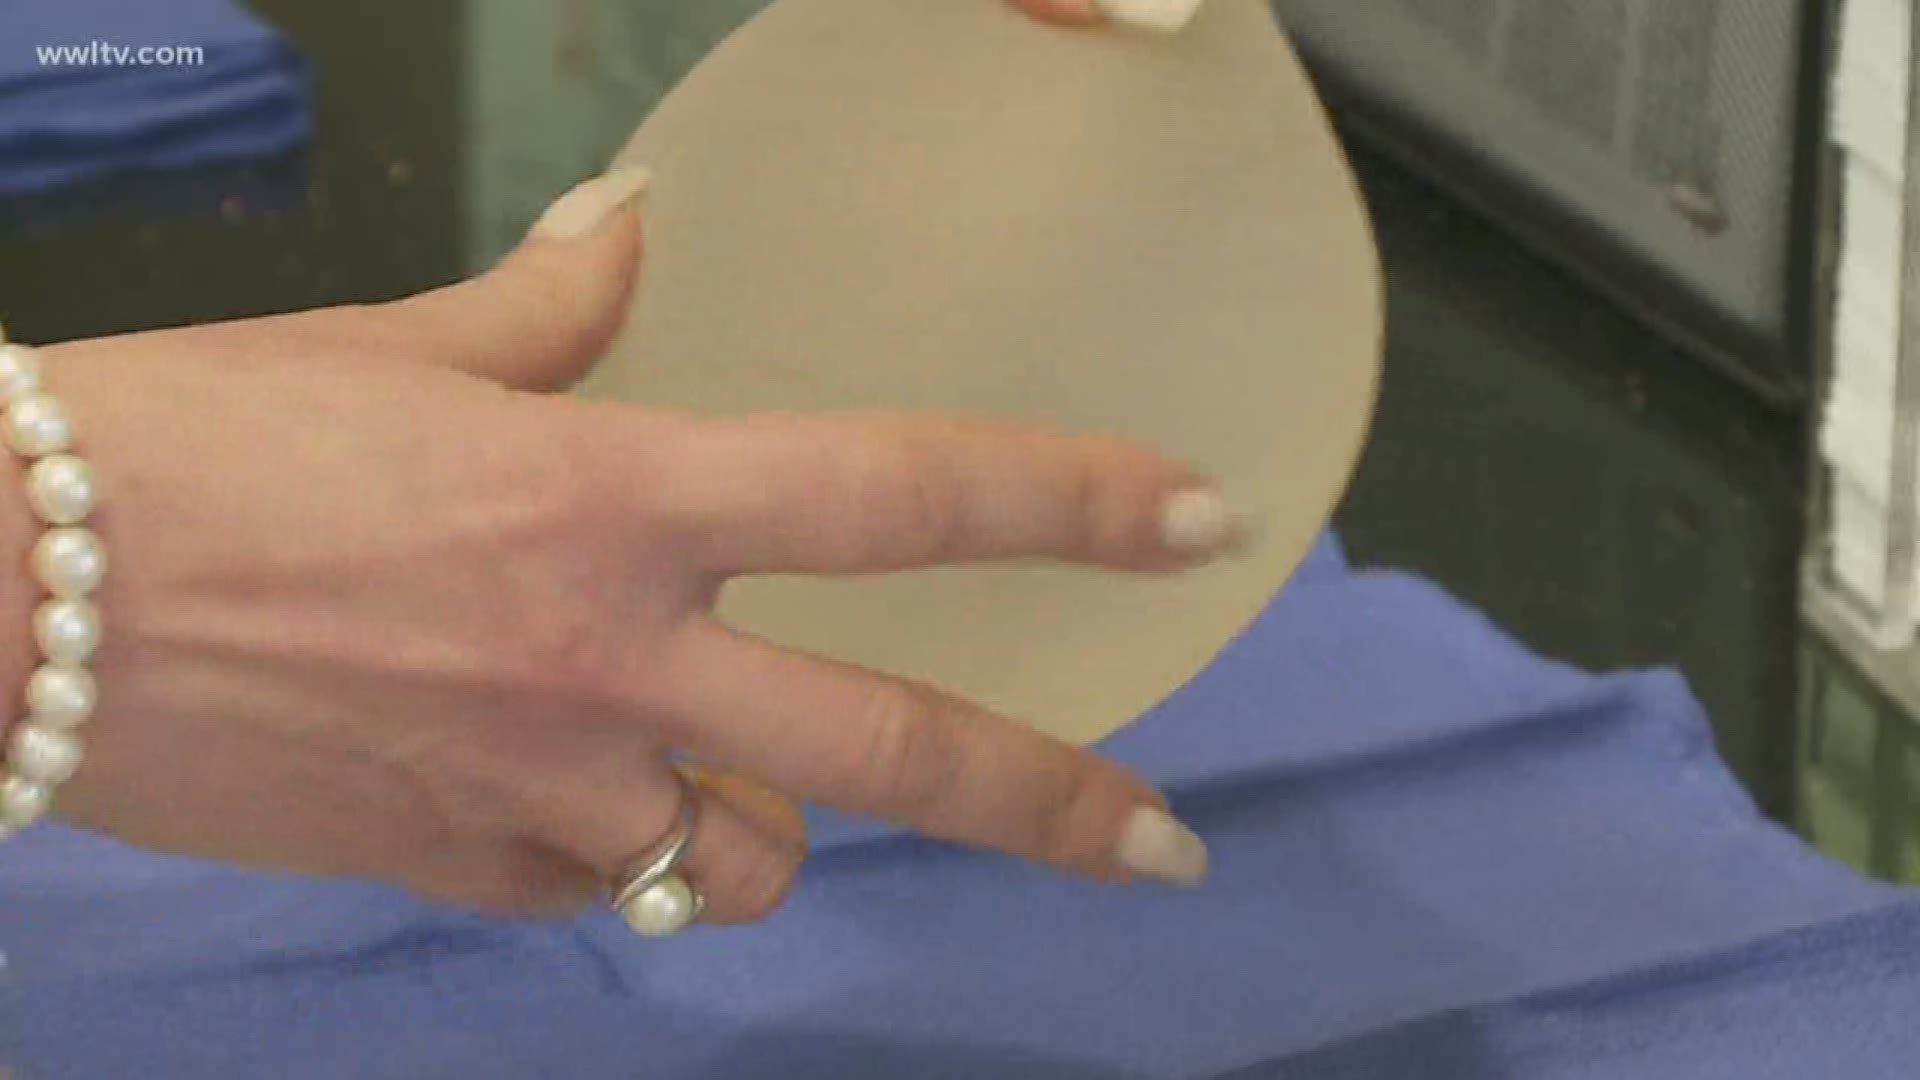 Although that cancer risk is rare, local doctors are hearing from concerned women who have implants for either reconstruction or for augmentation.